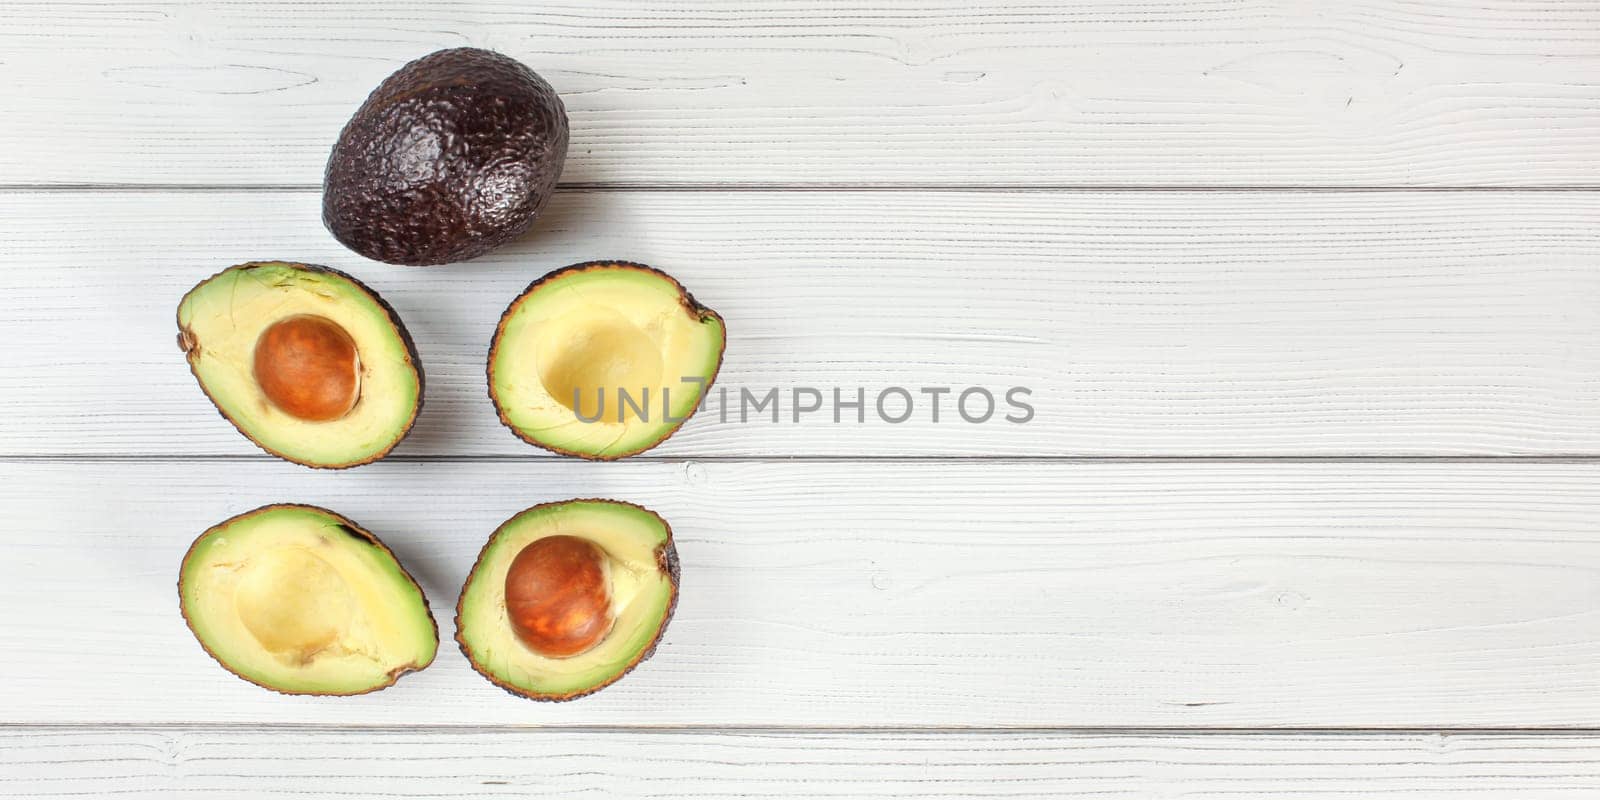 Ripe avocado halves and one whole fruit arranged on white boards desk, view from above - wide photo with space for text right side by Ivanko